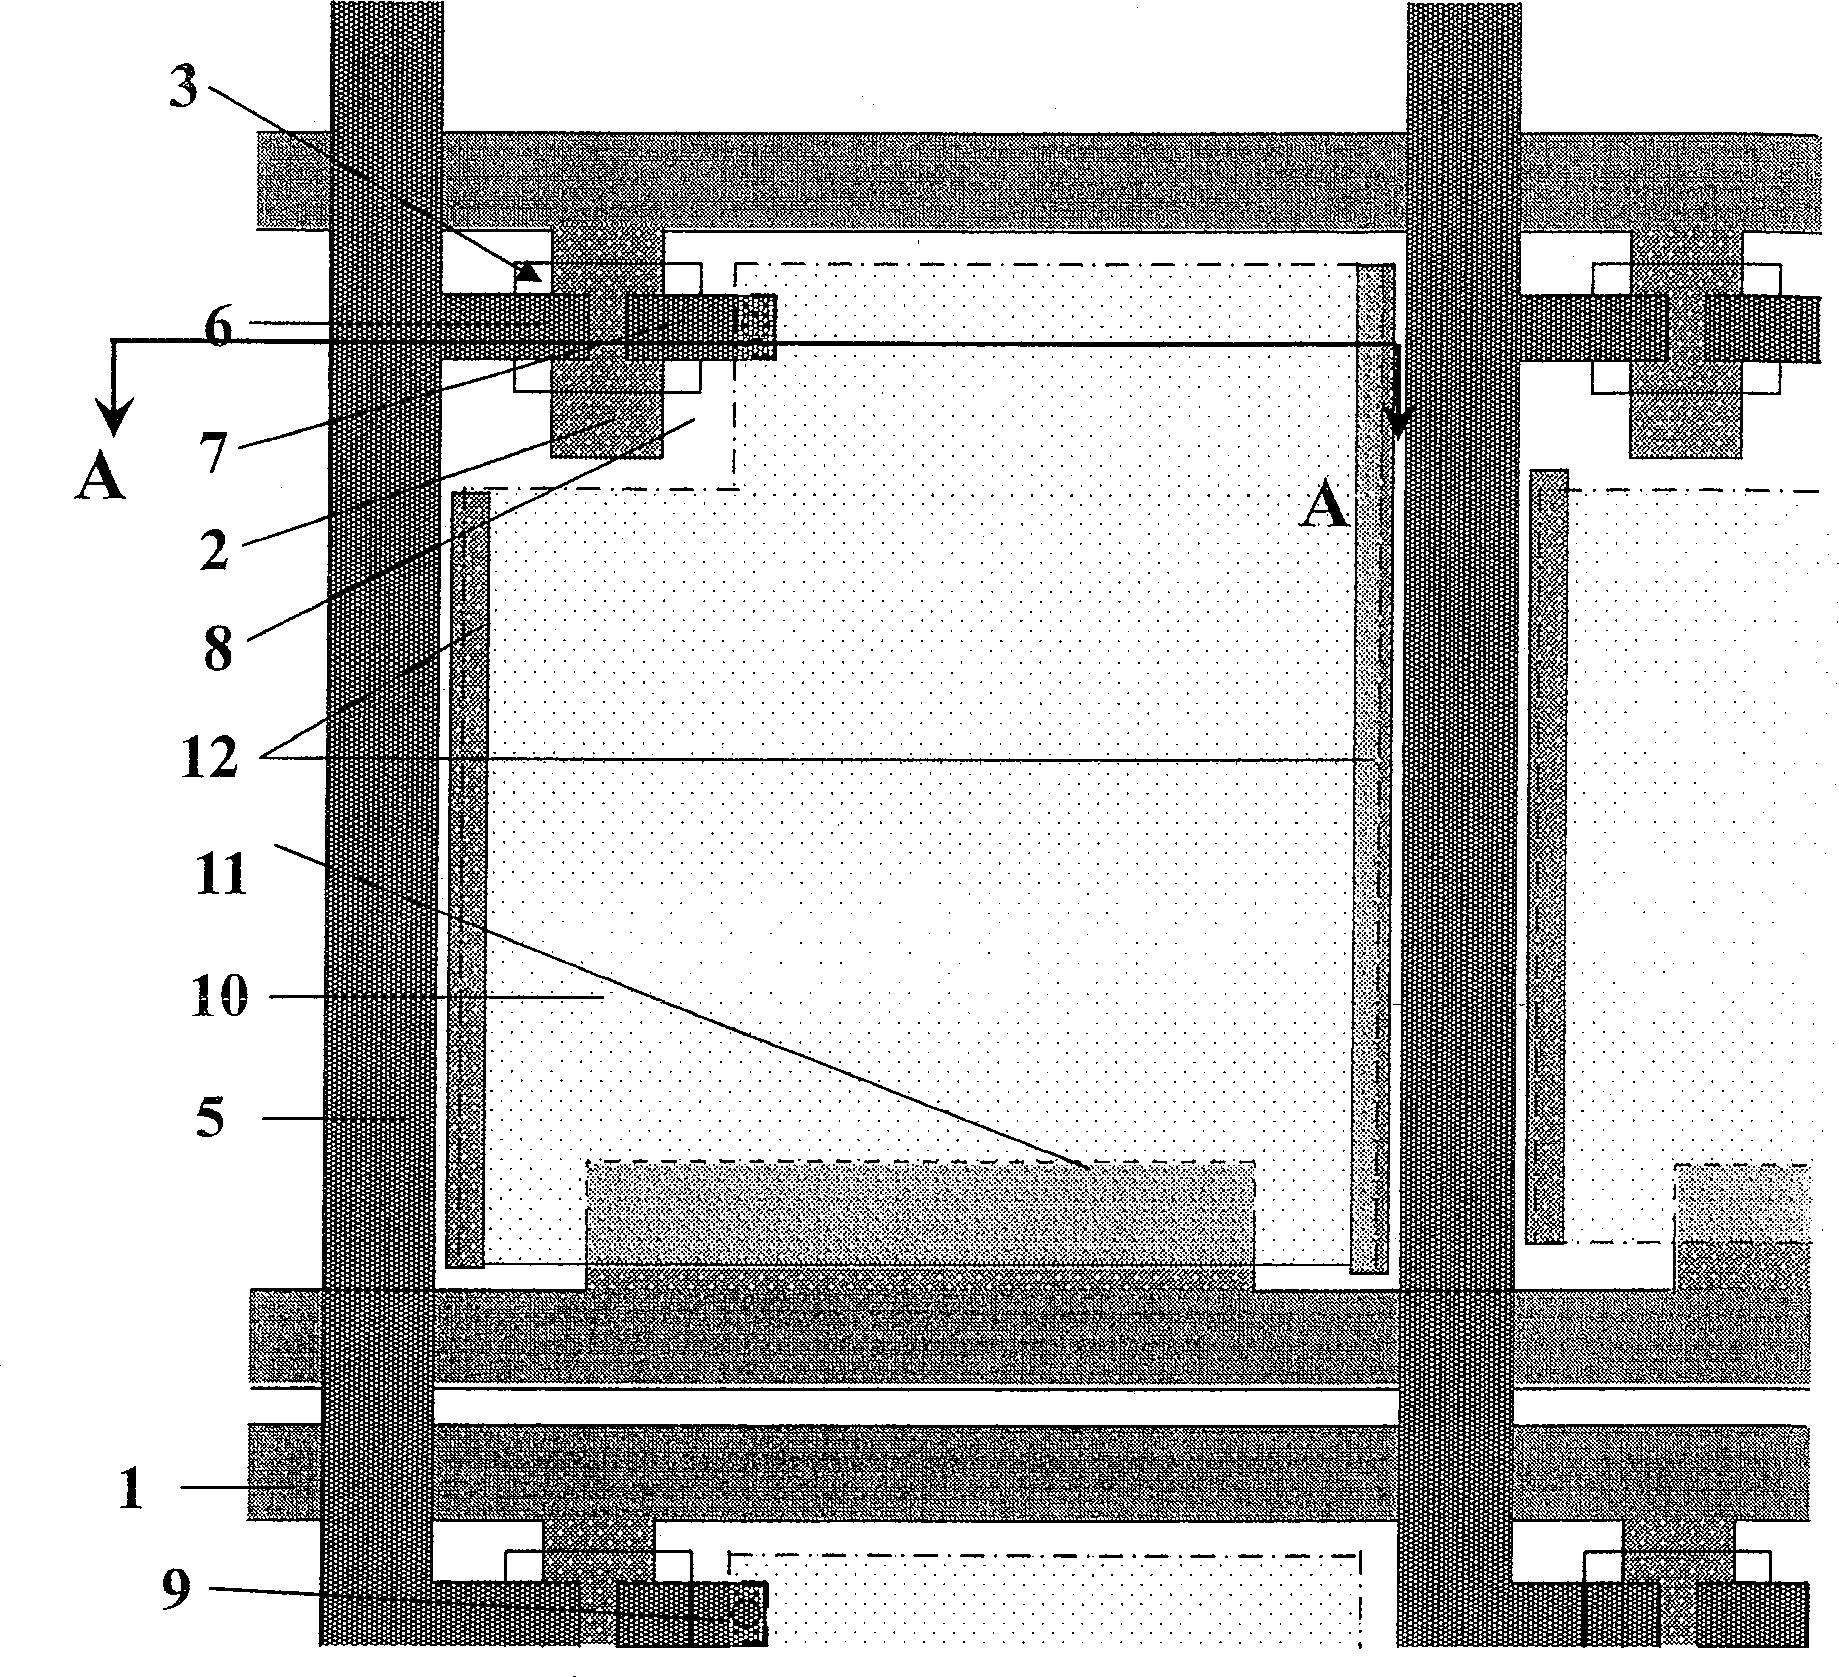 TFT LCD array substrate structure and its producing method